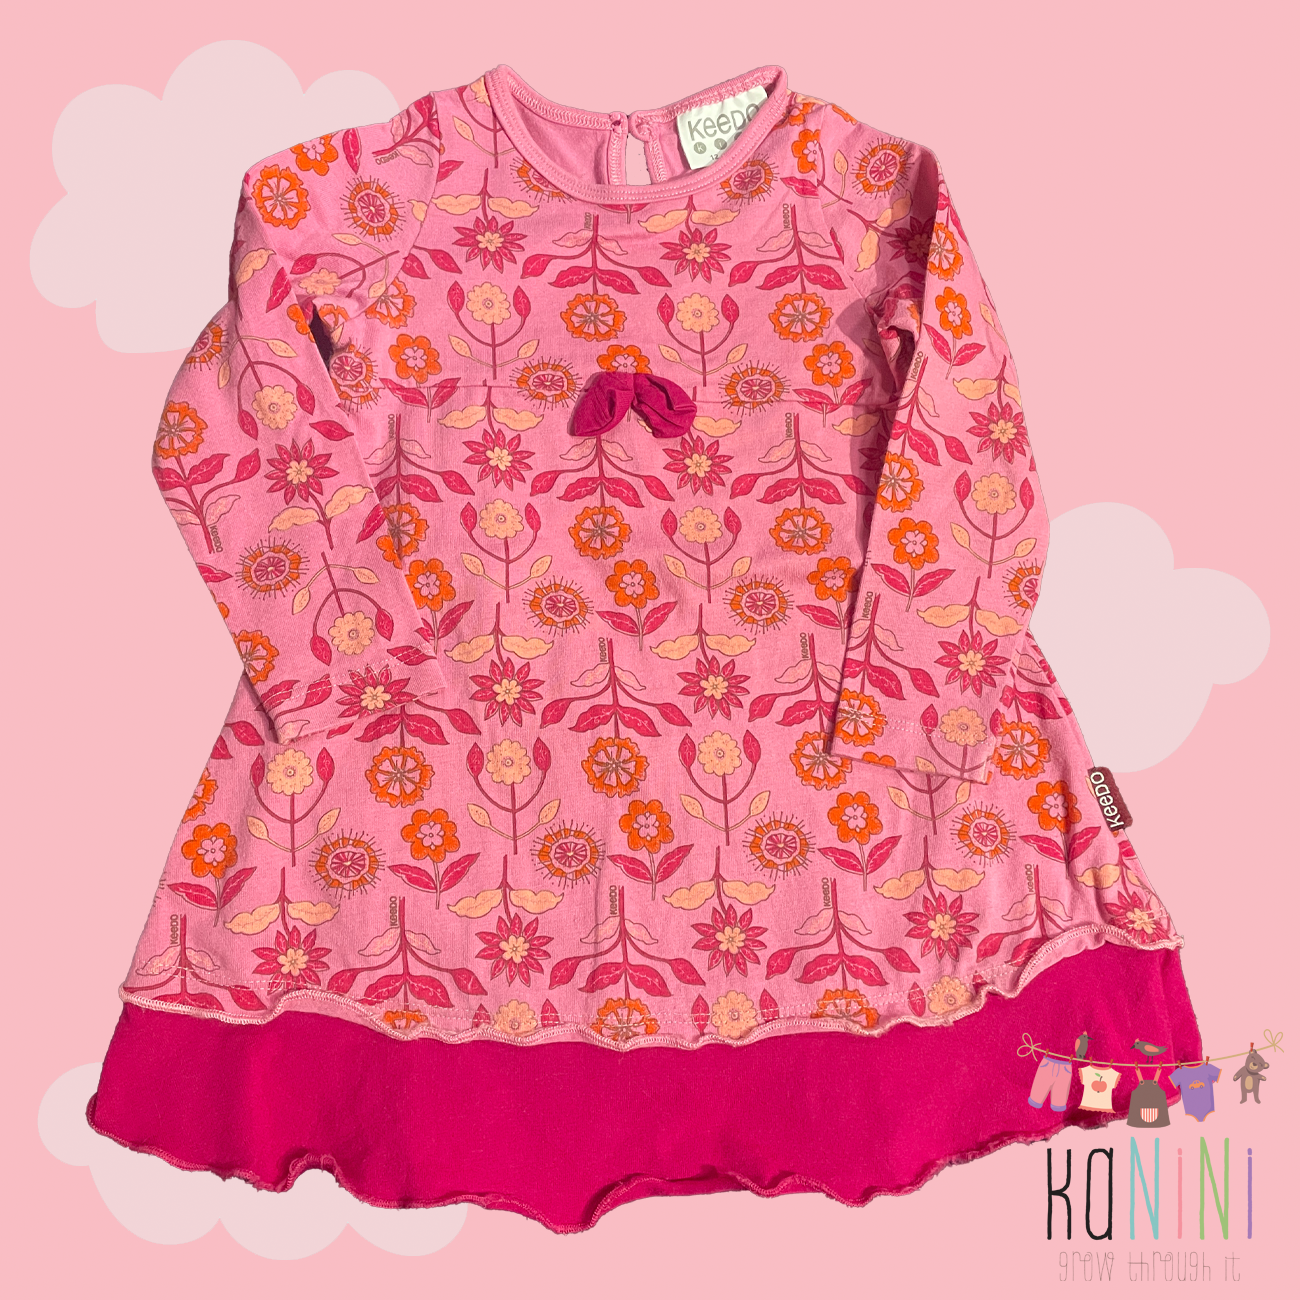 Featured image for “Keedo 12 - 18 Months Girls Pink Floral Dress”